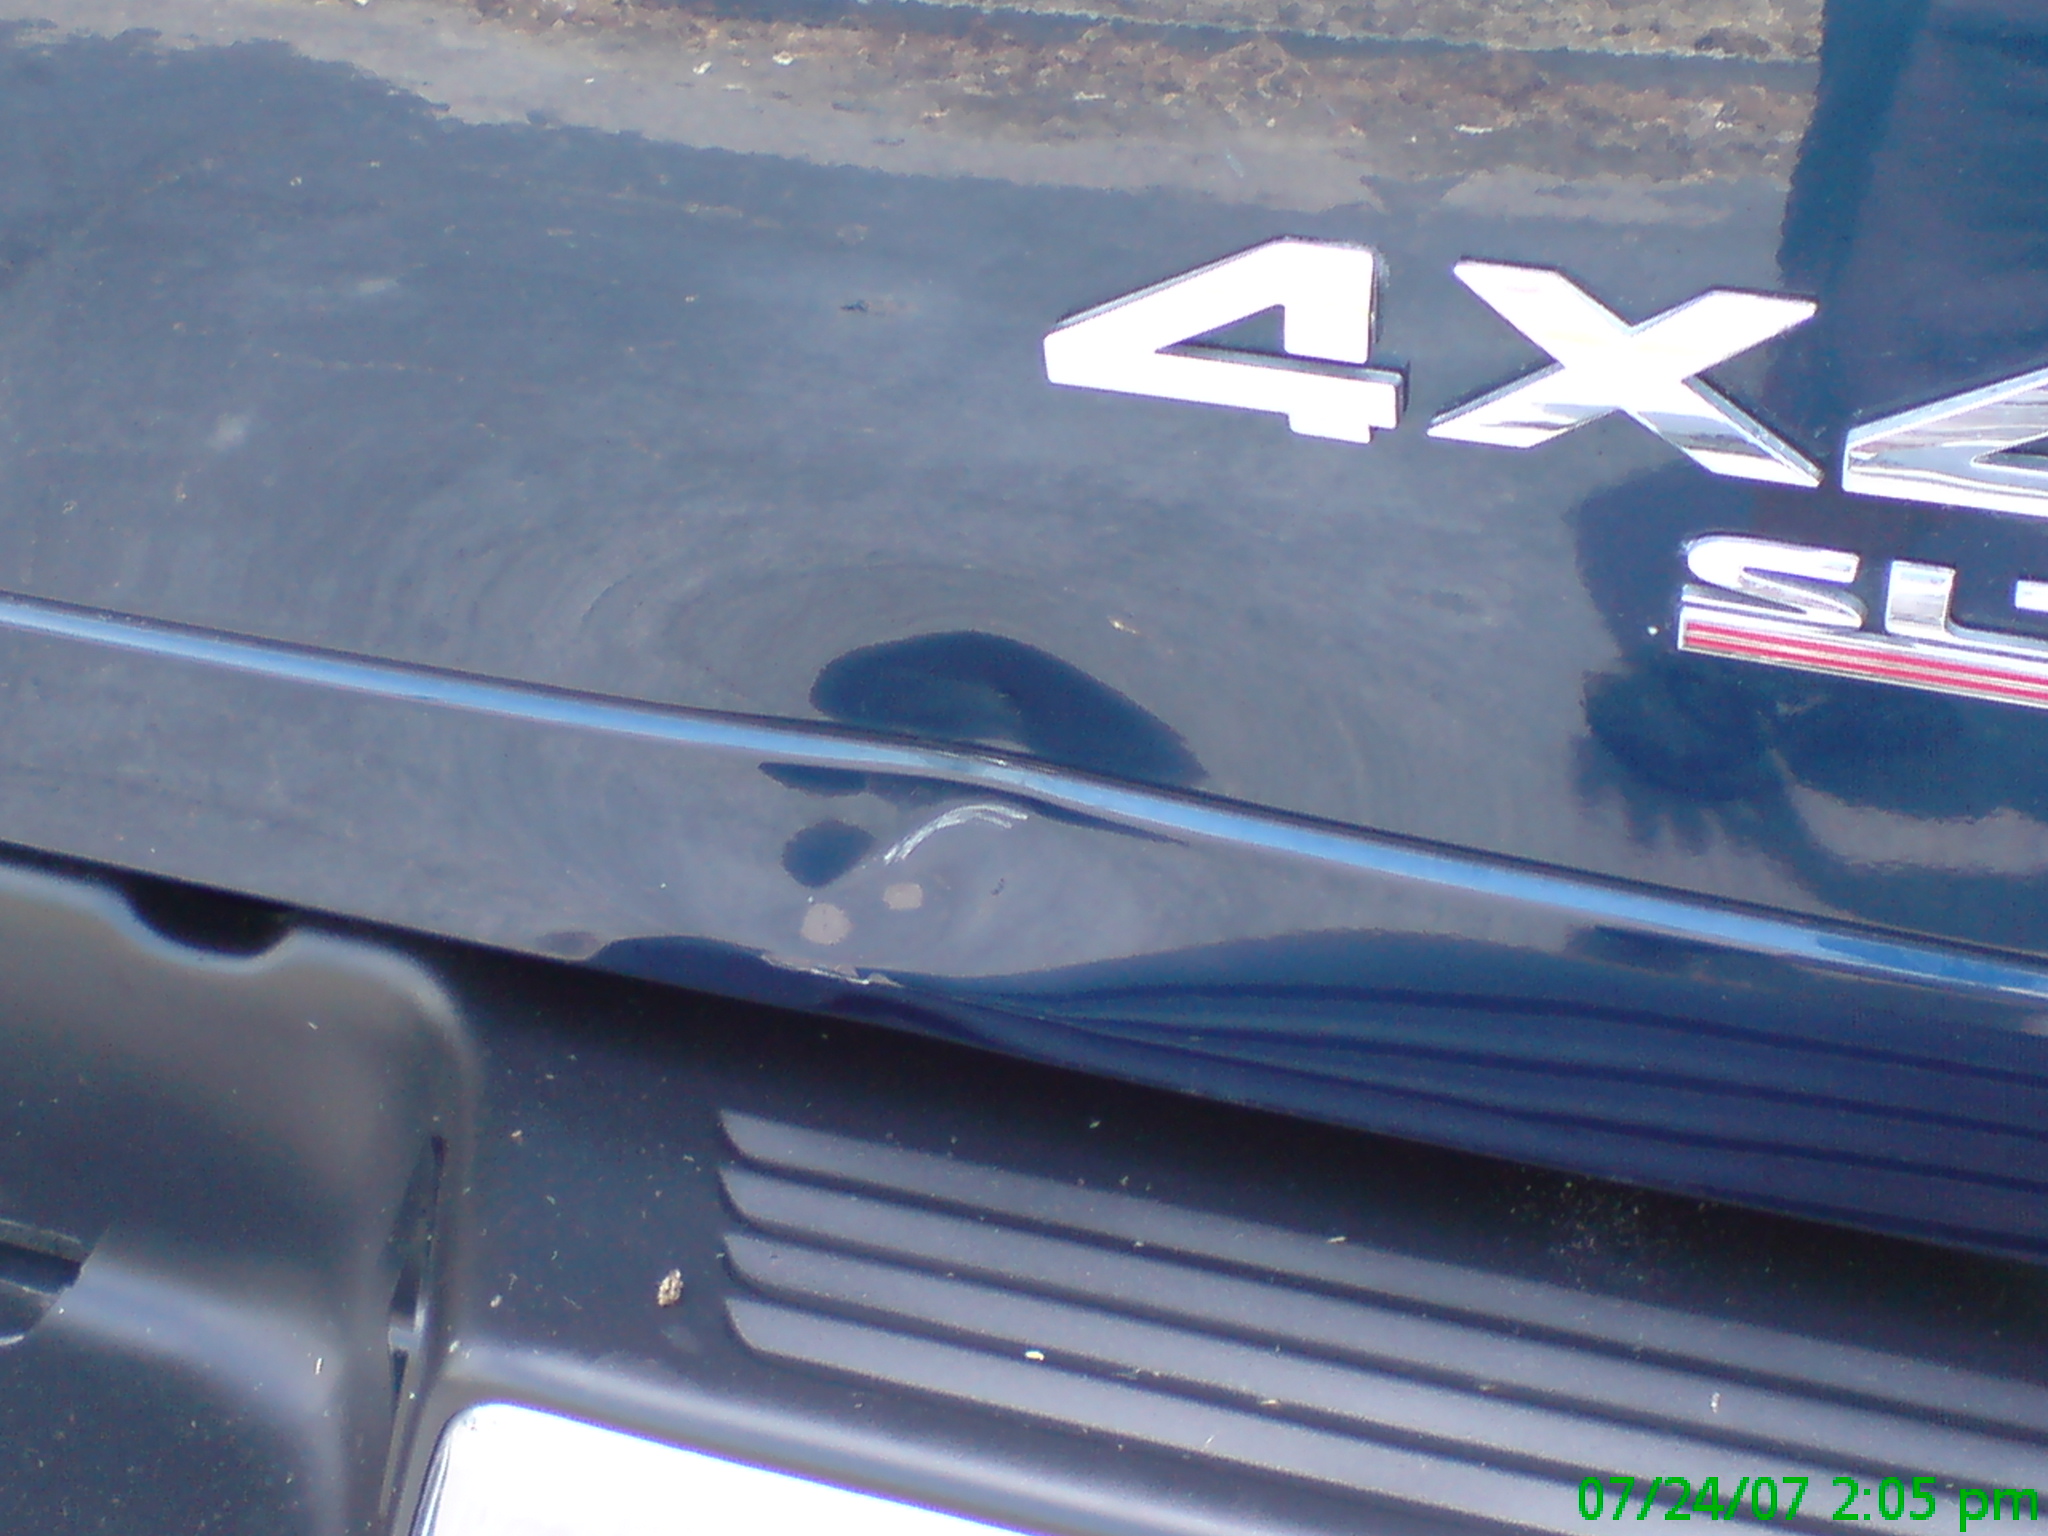 Holy City Dent Guy-Paintless dent repair-Click on picture to return to Photo page